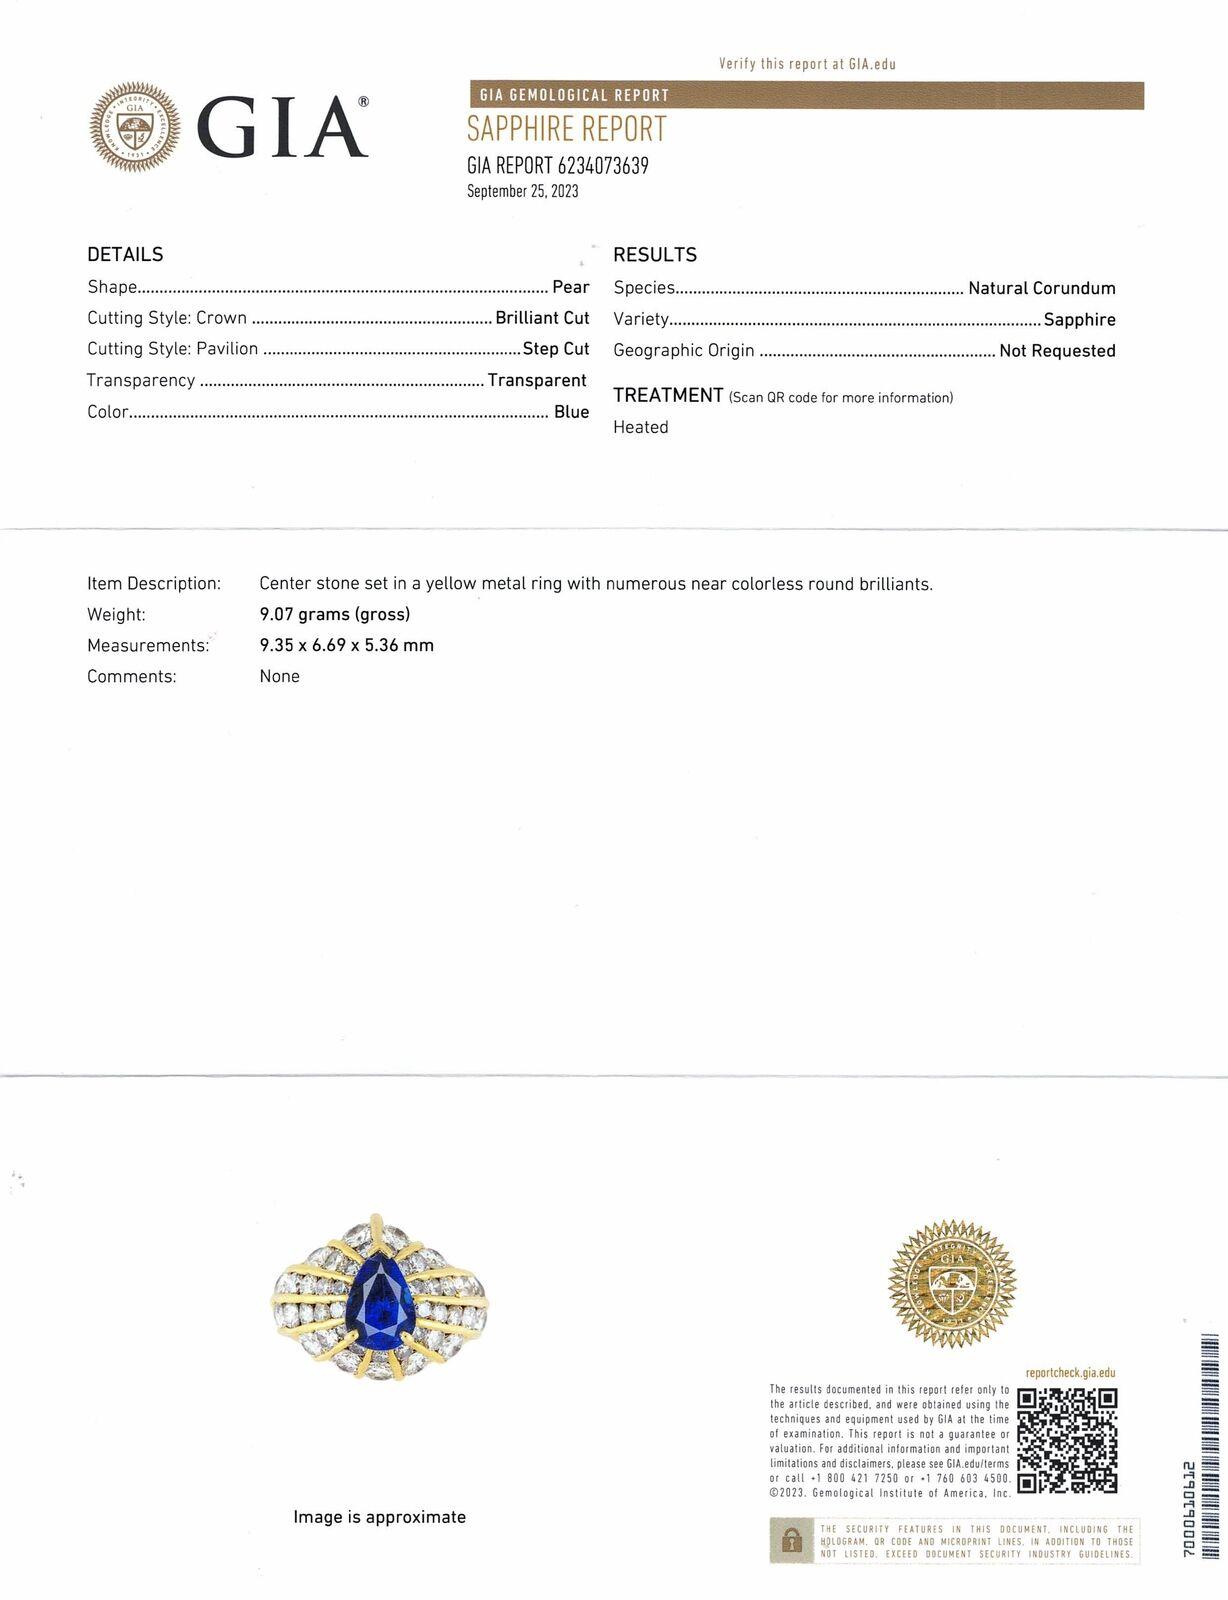 
Specifications:


Main Stone: Pear Cut Blue Sapphire 9.35x6.69x5.36mm

Side stones: Diamonds 42 Pieces

Diamond Color: H

Diamond Clarity: VS2

Metal: 18K Gold (Au 70-75%)

Weight: 9 gr

Ring Size: 6.75 US

Hallmark:'18K'

Certification: GIA
